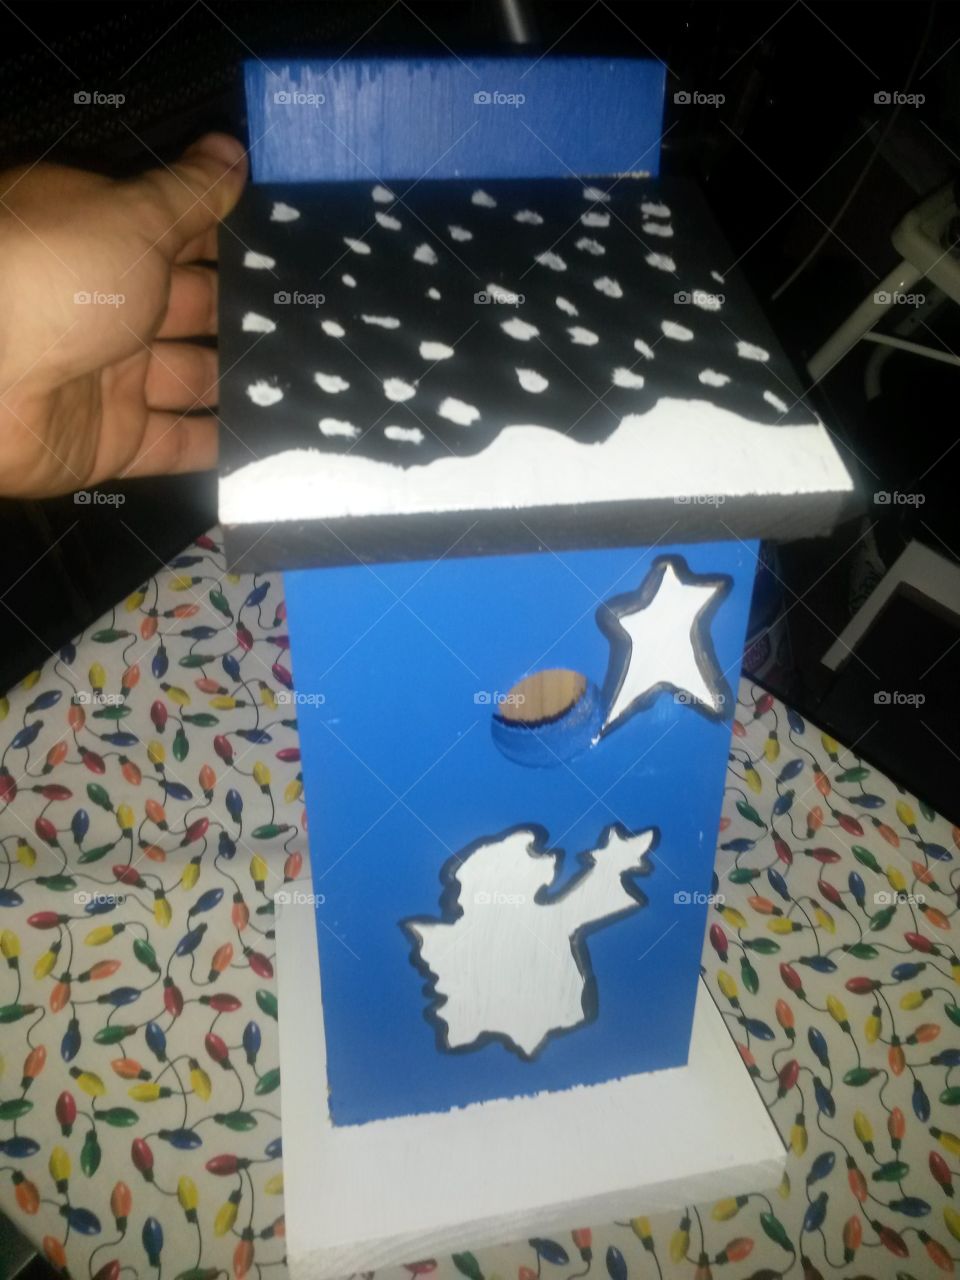 bluebird house made by me